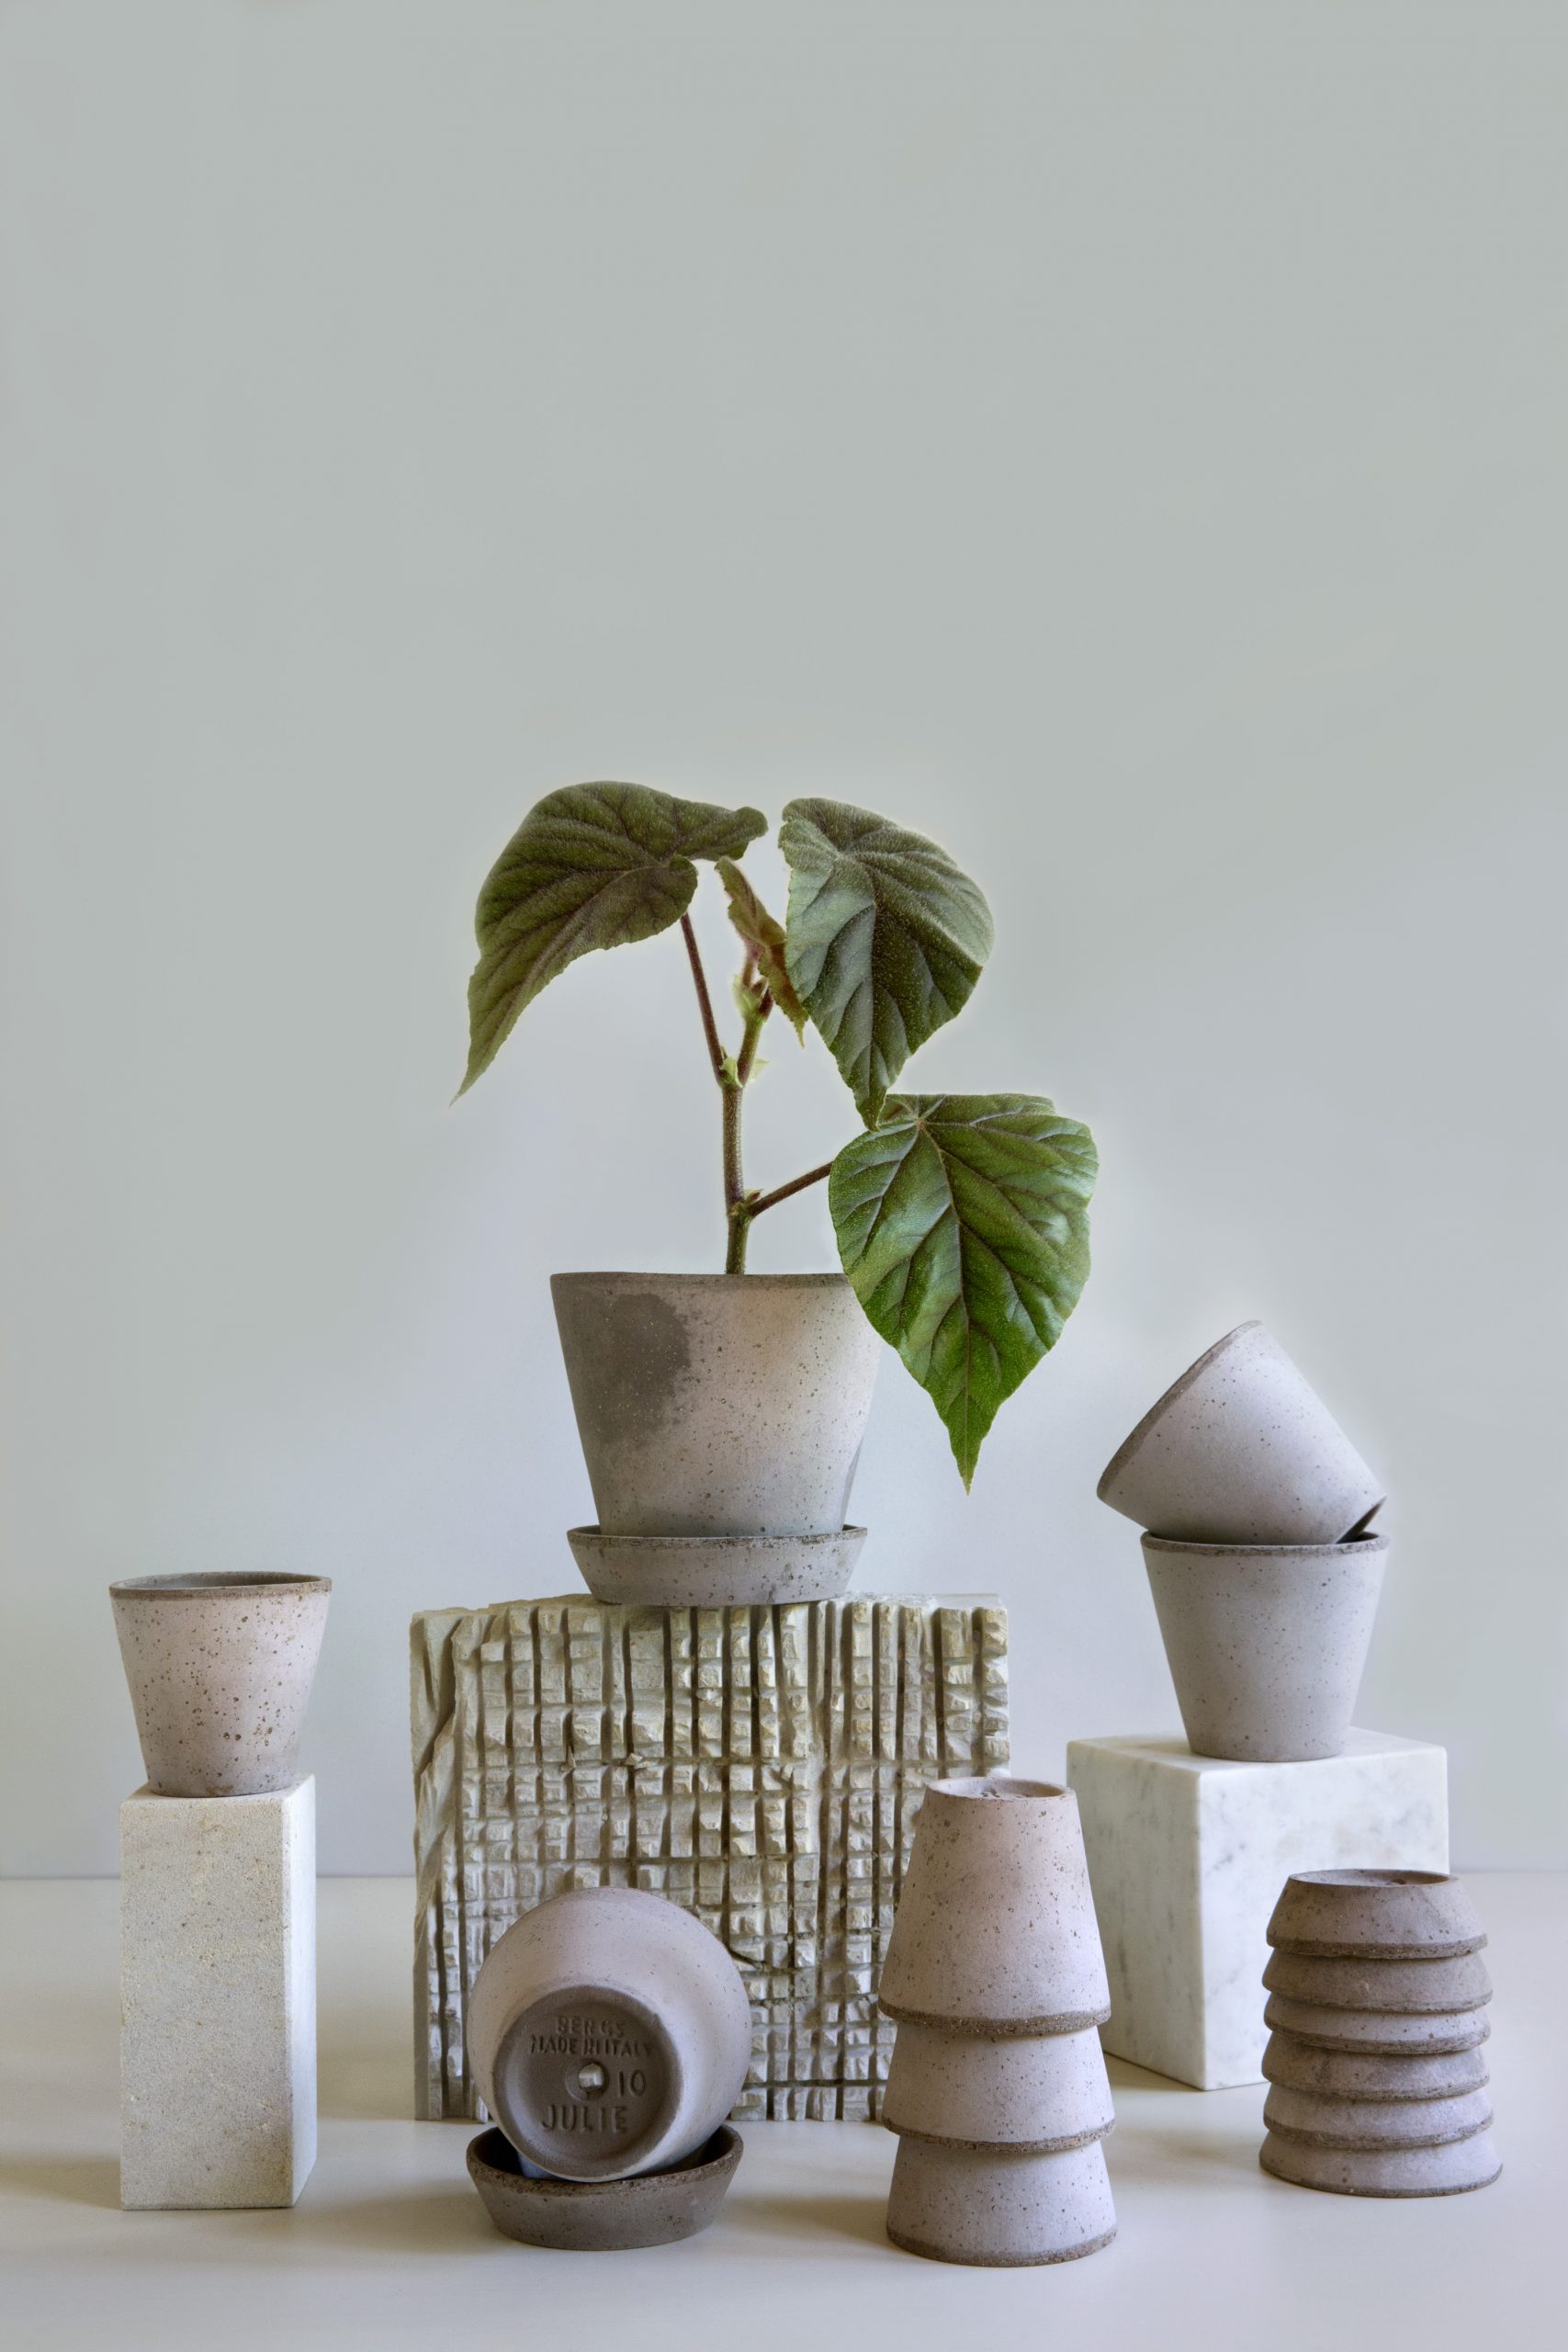 Terracotta pots by Bergs Potter - Collection of the simple decorative Julie Pot - in Nordic Grey.